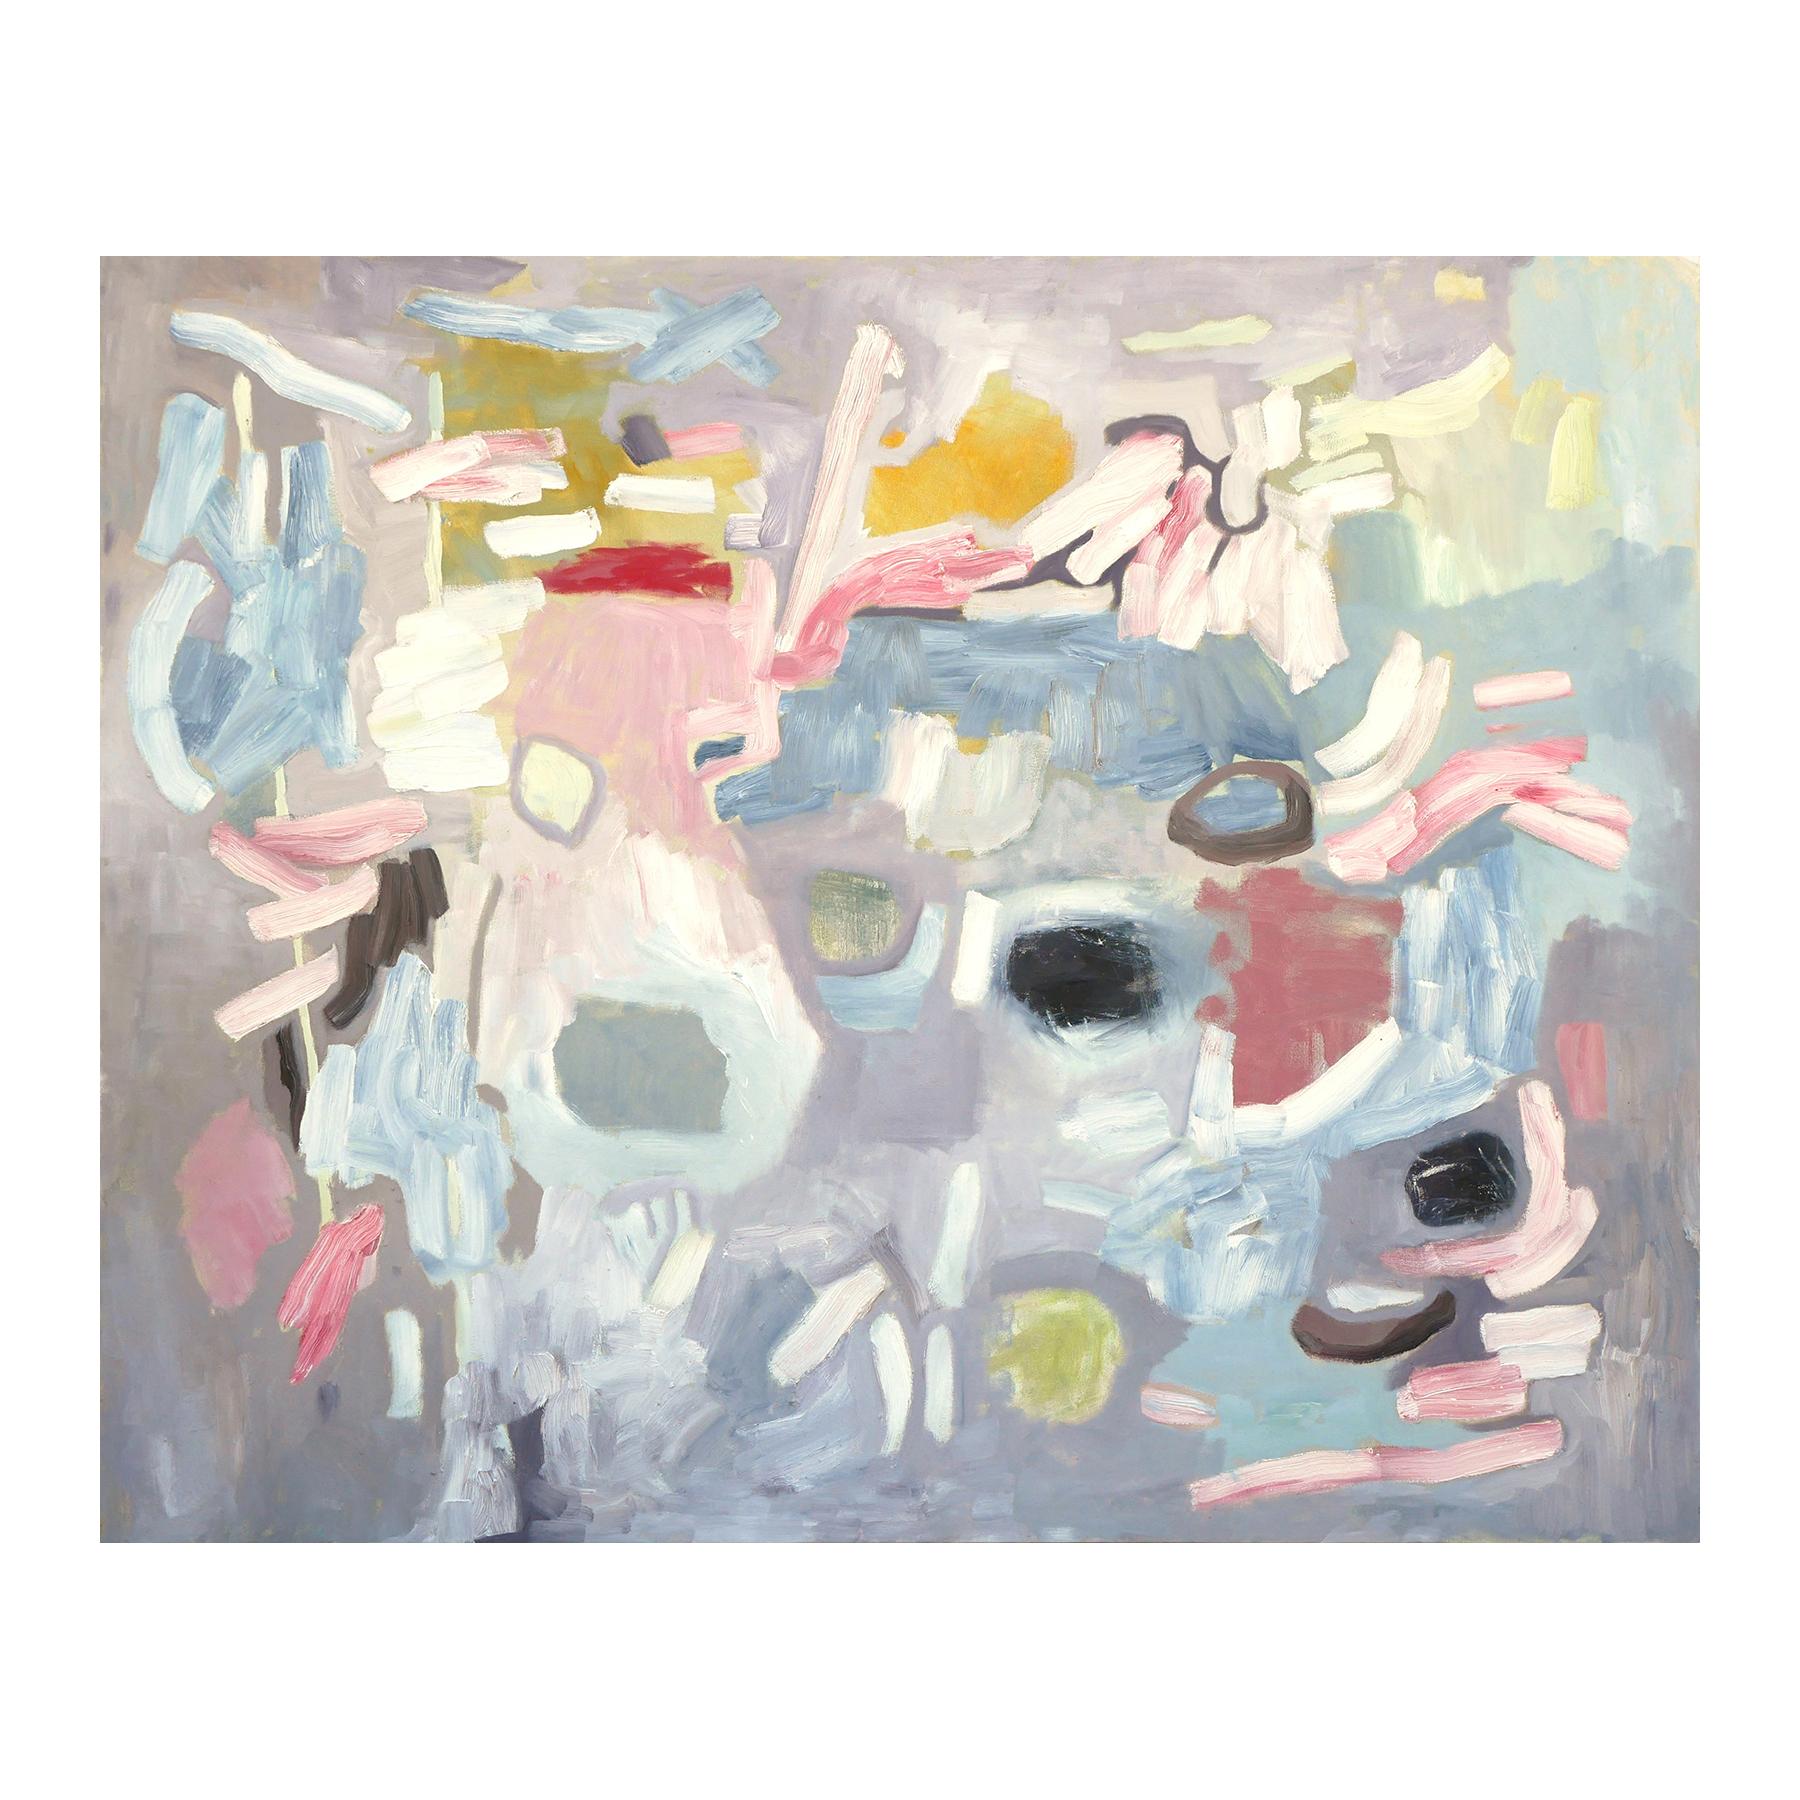 Abstract expressionist oil painting by contemporary Houston artist Benji Stiles. The work features gestural marks and rounded shapes in pastel pink, yellow, and blues set against a light grey background. Currently unframed, but options are